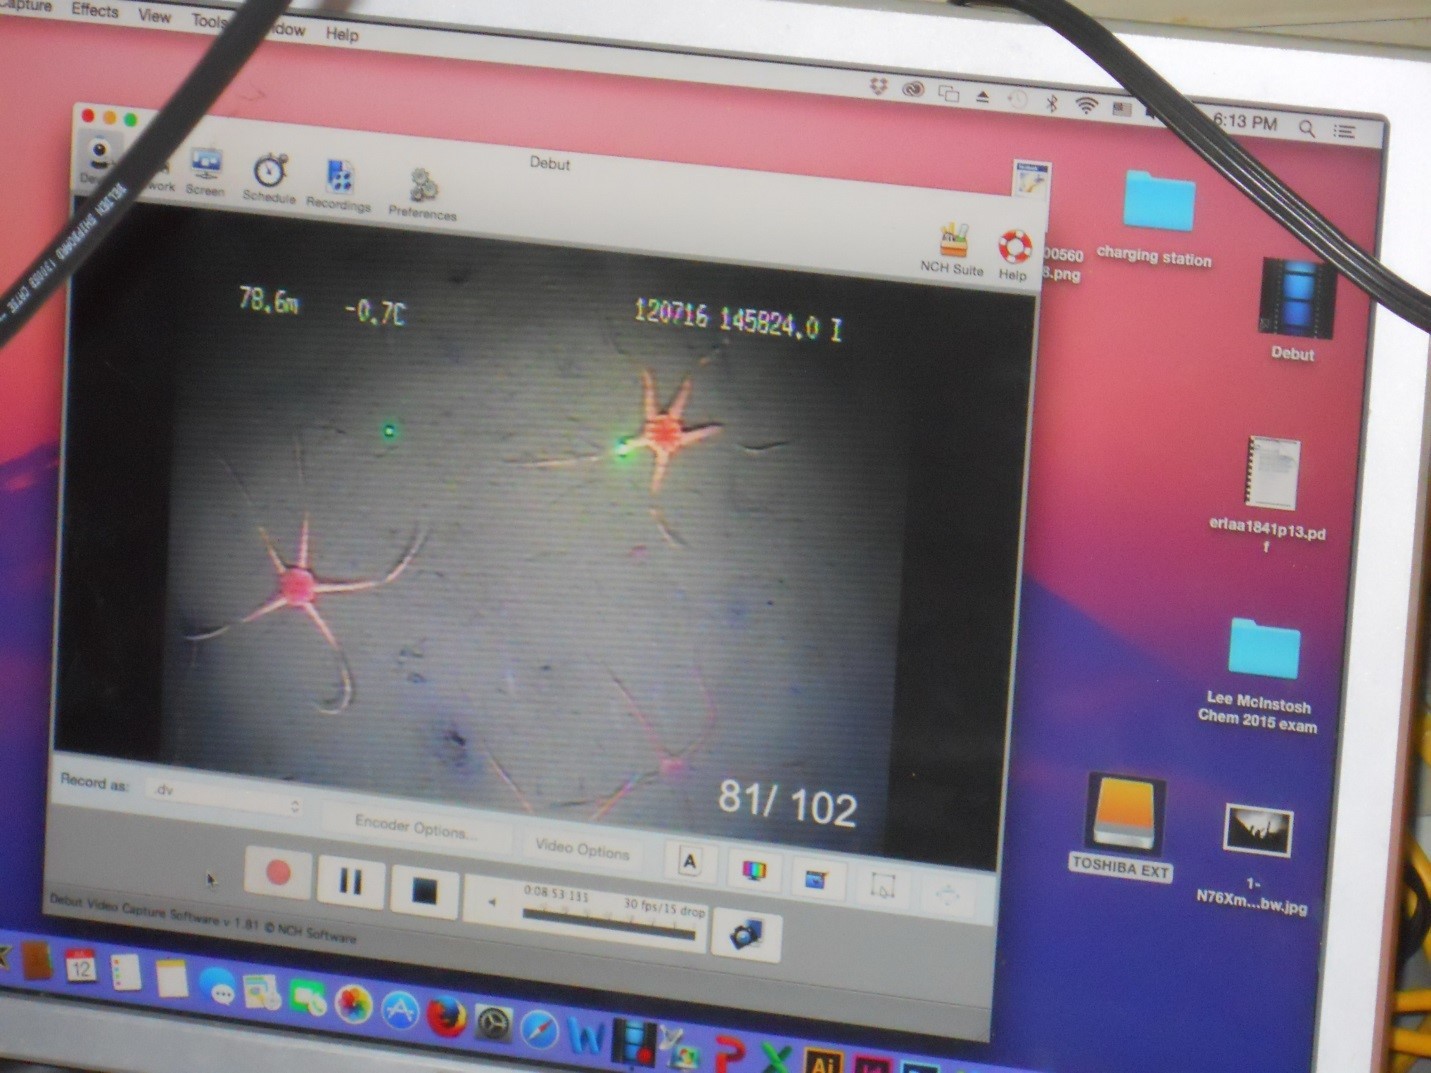 image on computer monitor showing two brittle stars on the seafloor of the Bering Sea